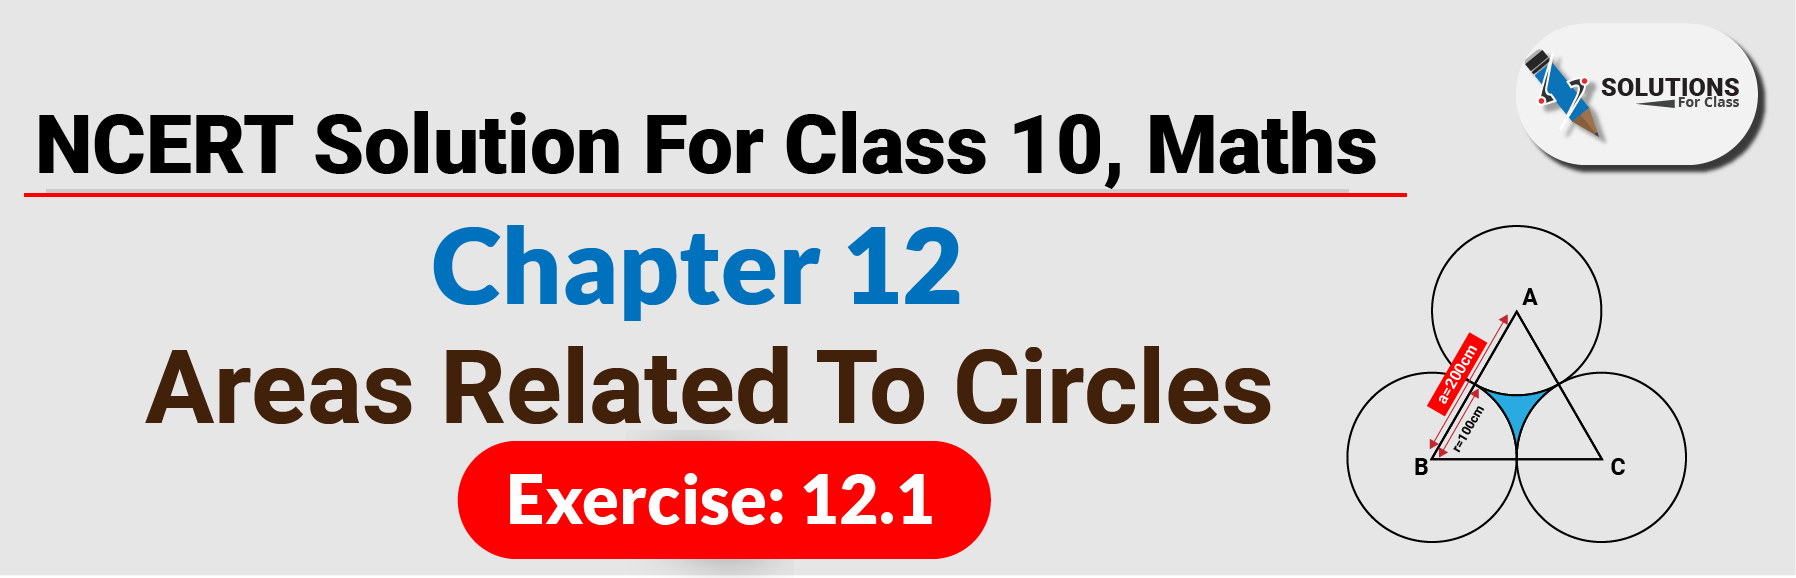 NCERT Solution For Class 10, Maths, Chapter 12, Areas Related To Circles, Ex. 12.1